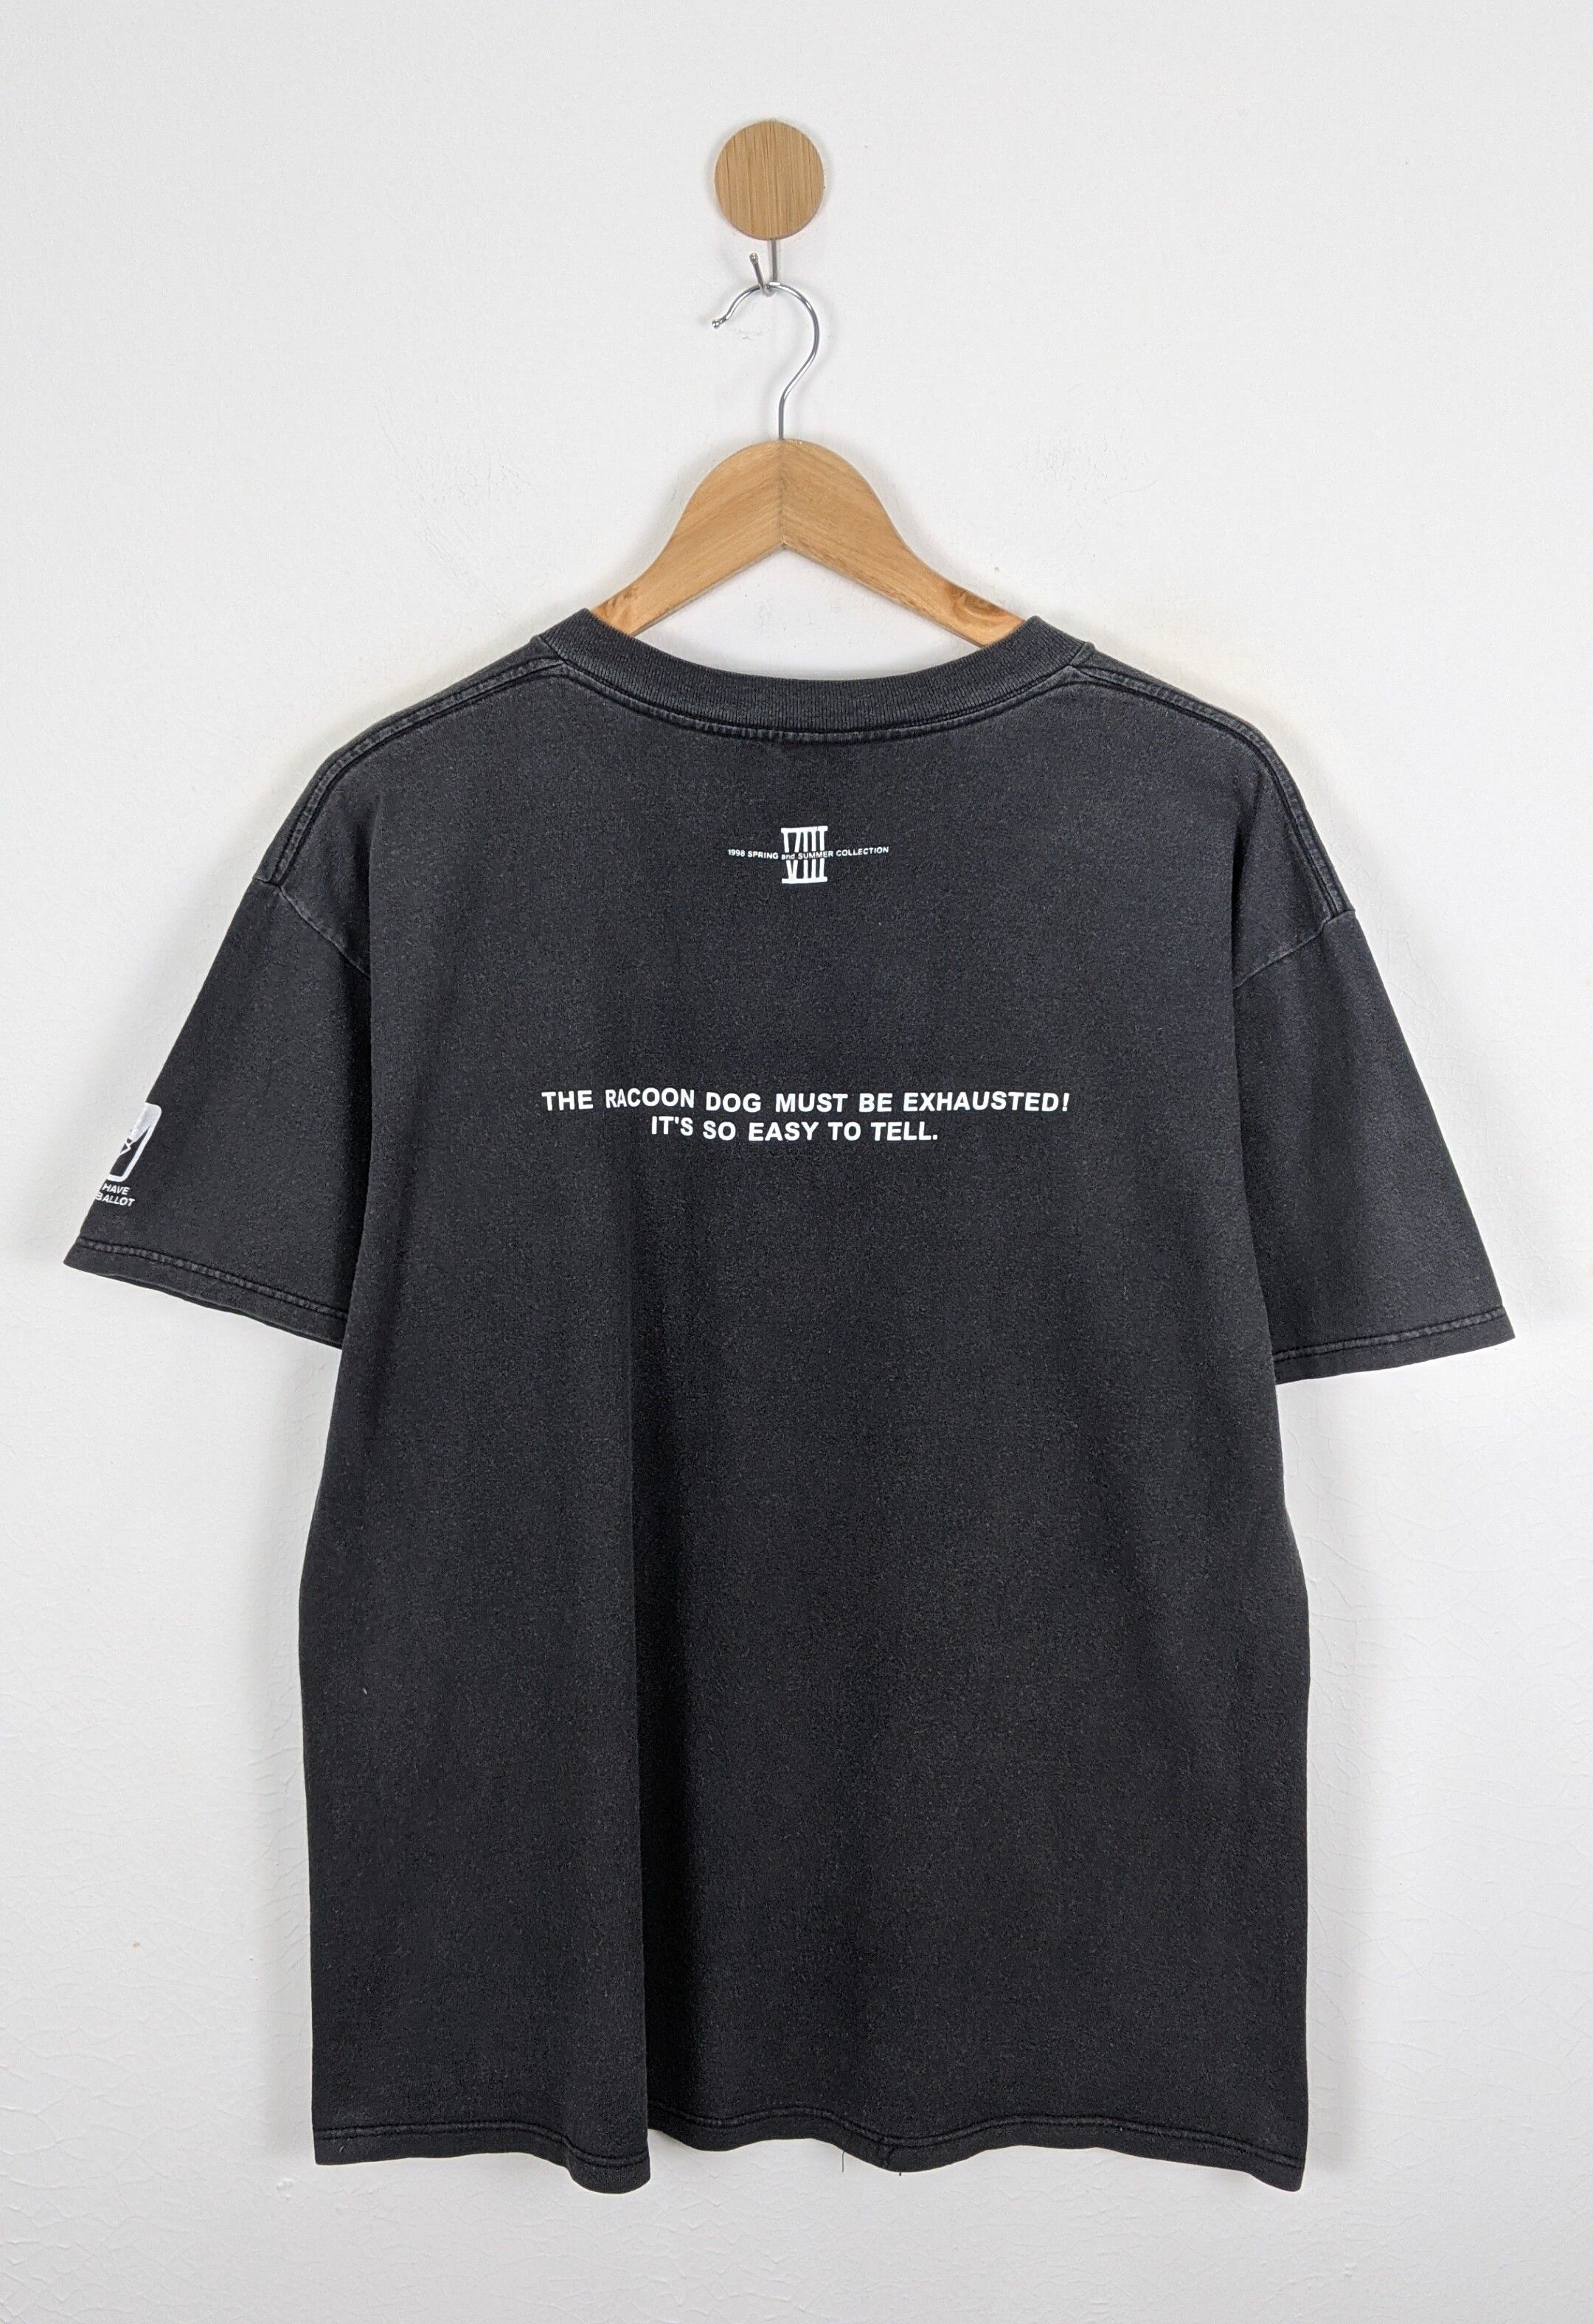 General Research Body And Walls 1998 shirt - 2